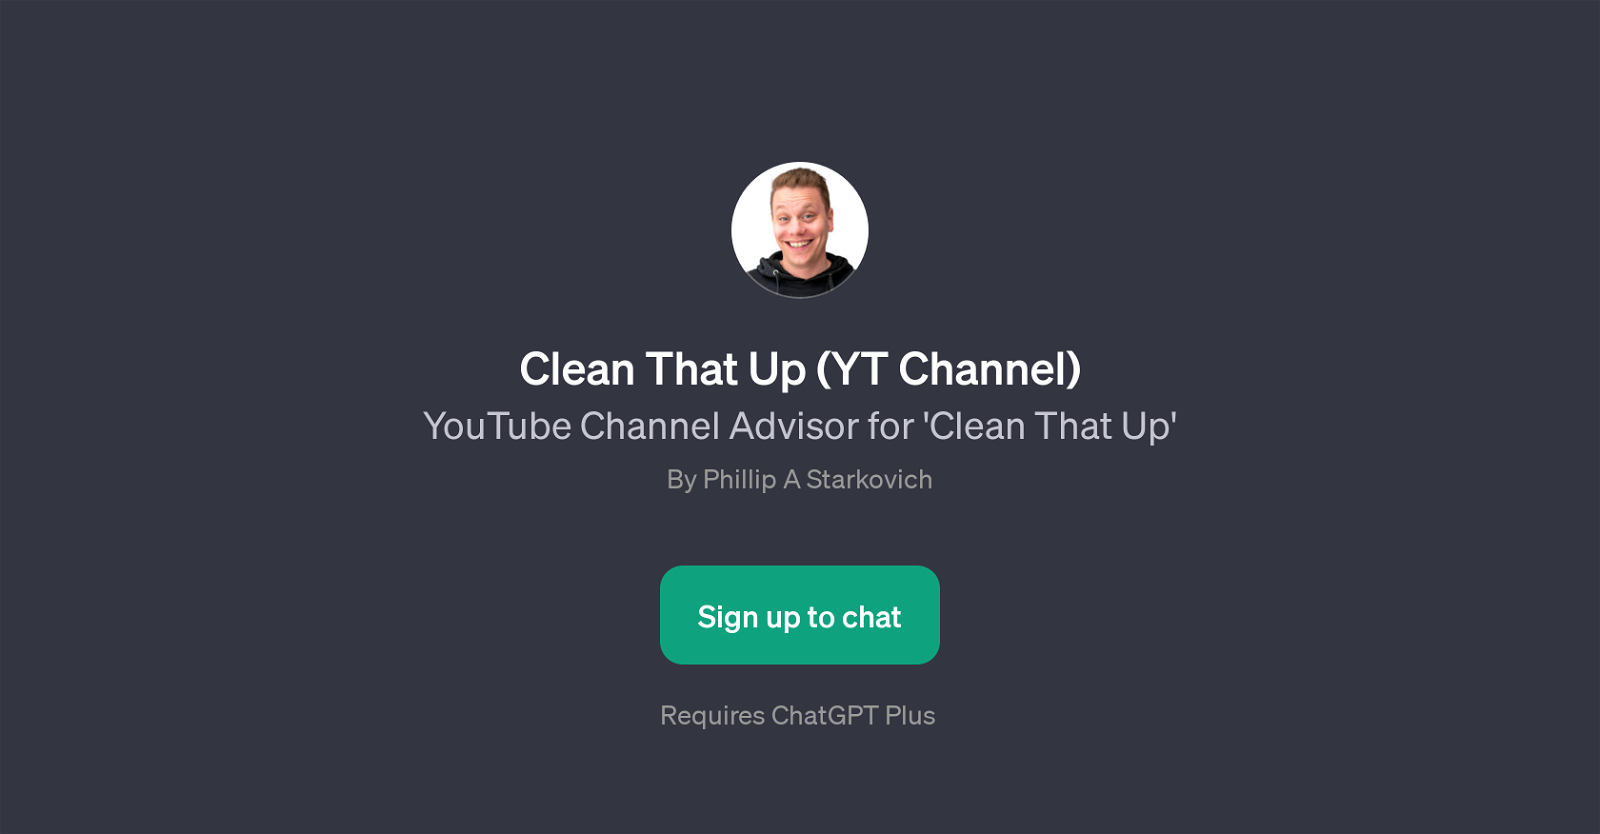 Clean That Up (YT Channel) website